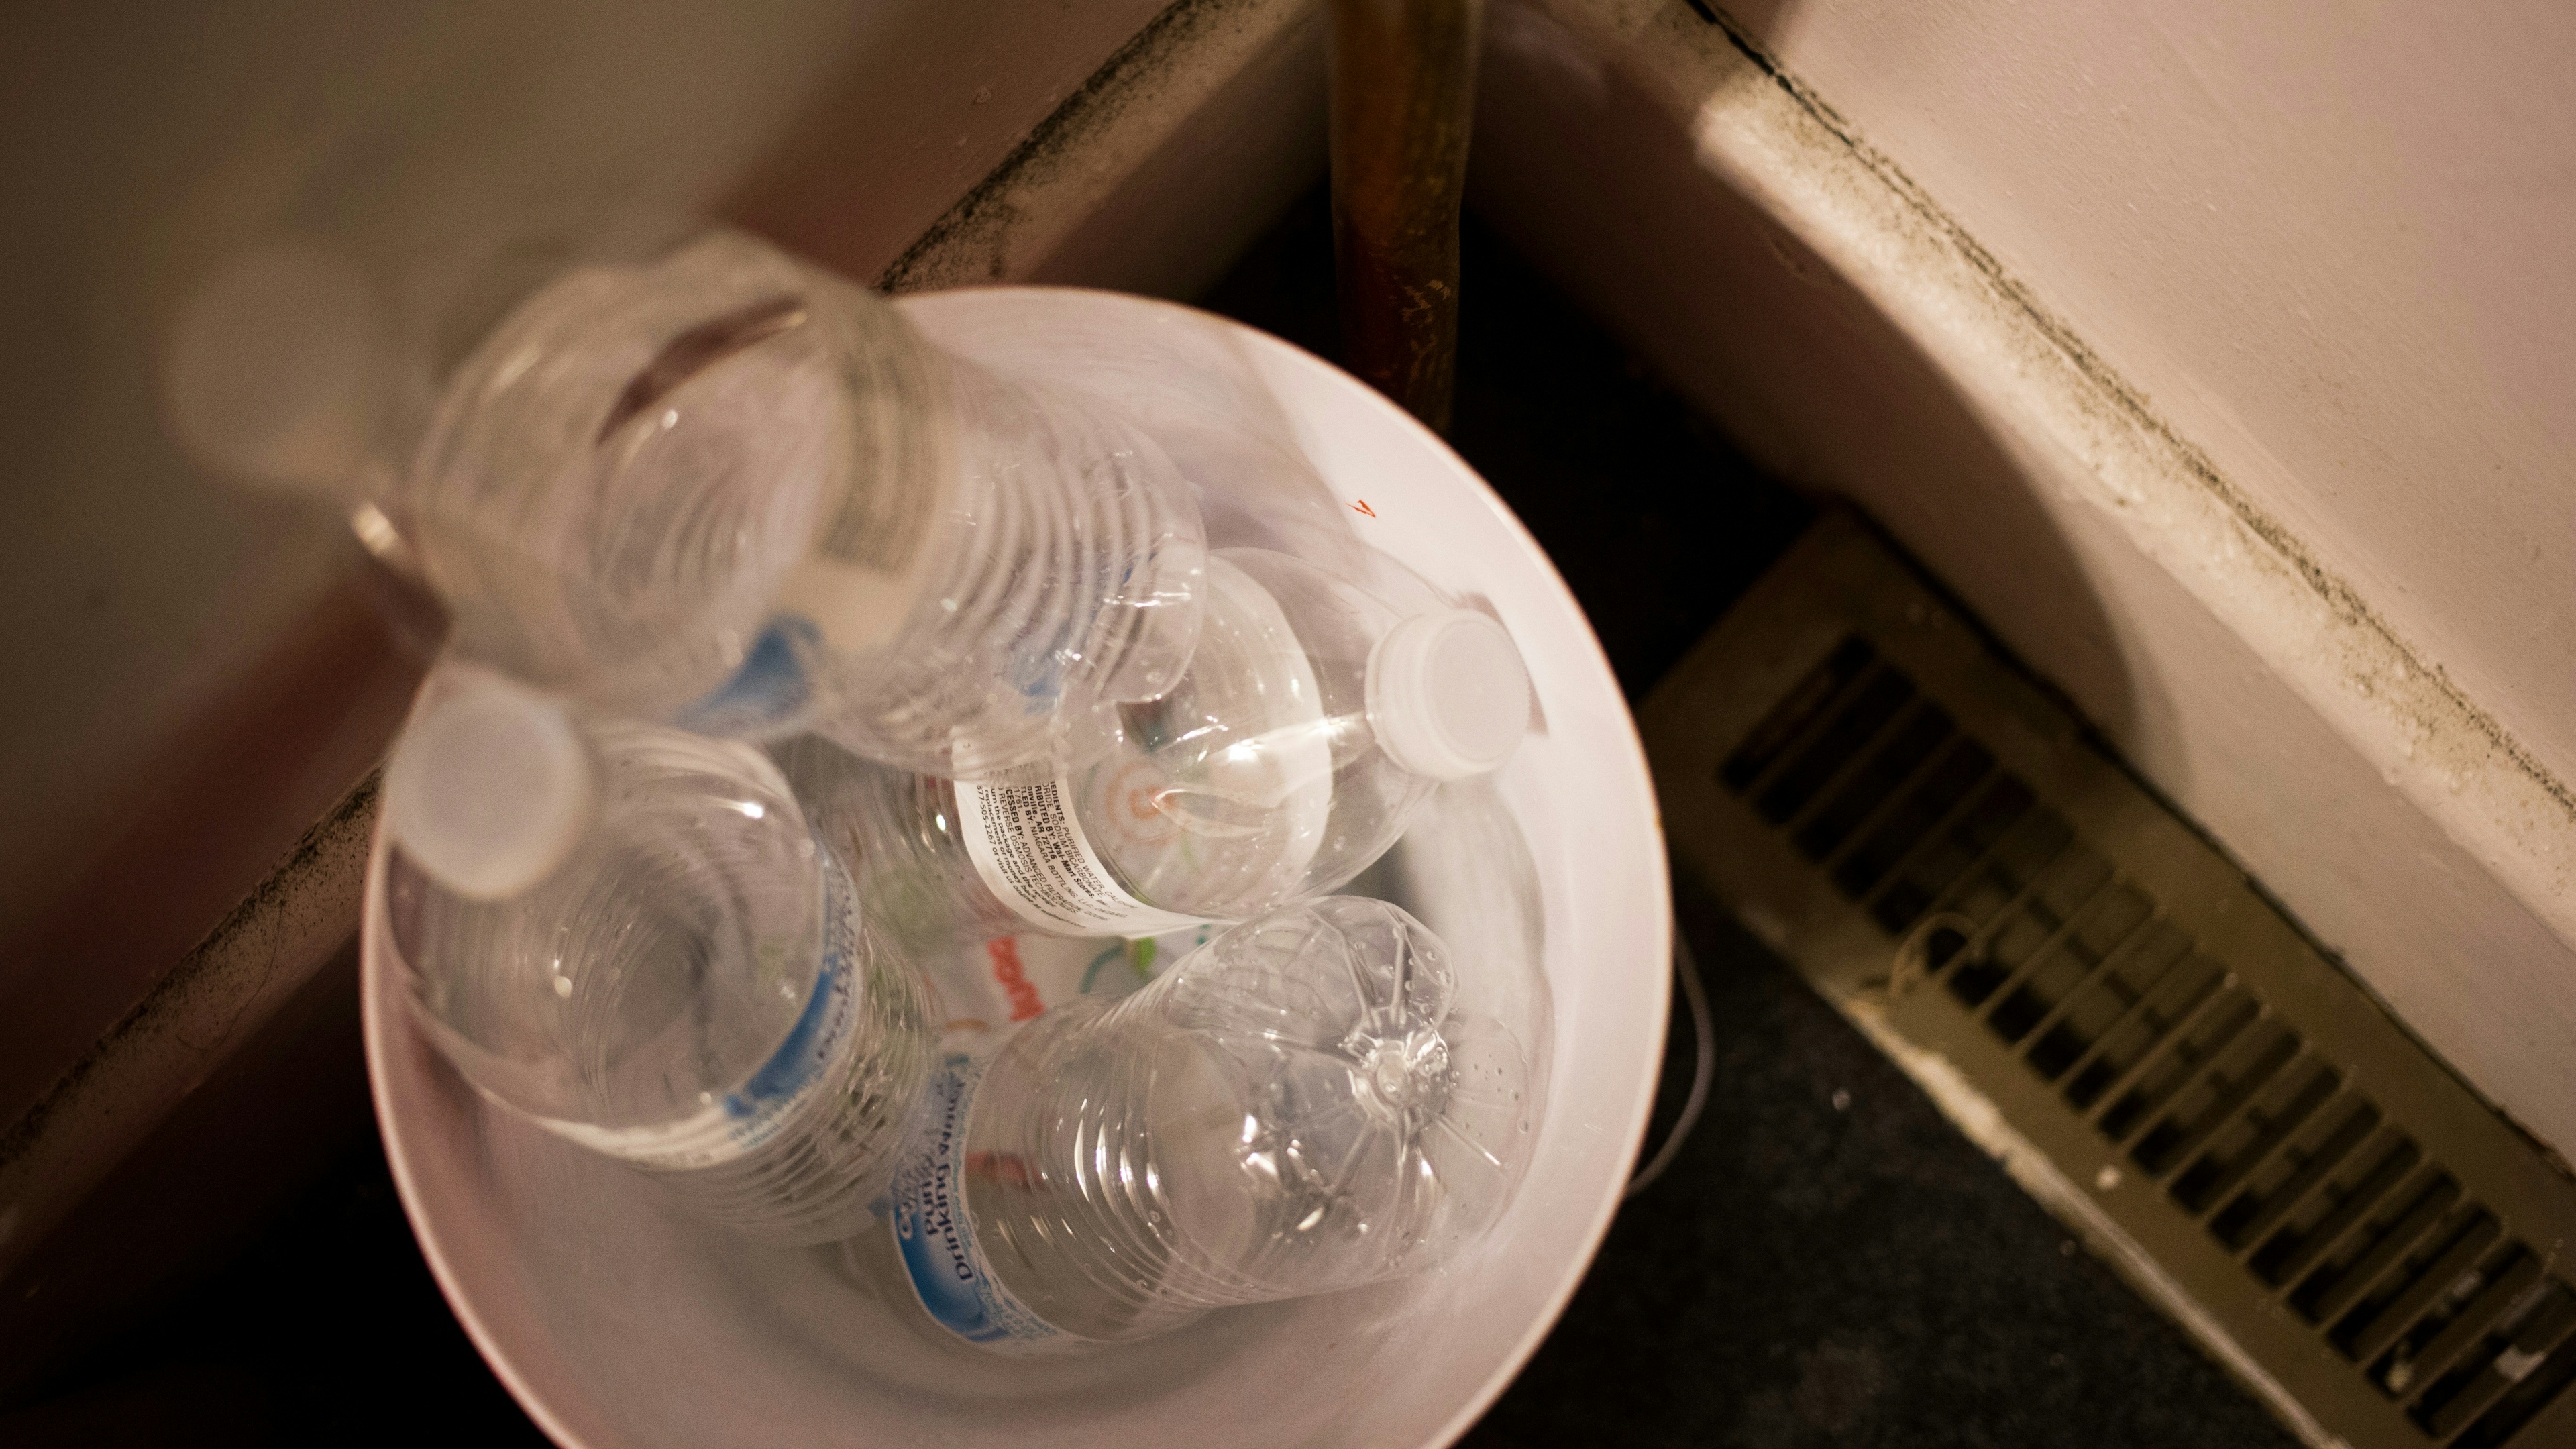 Bottles of water lay stacked in a trashcan